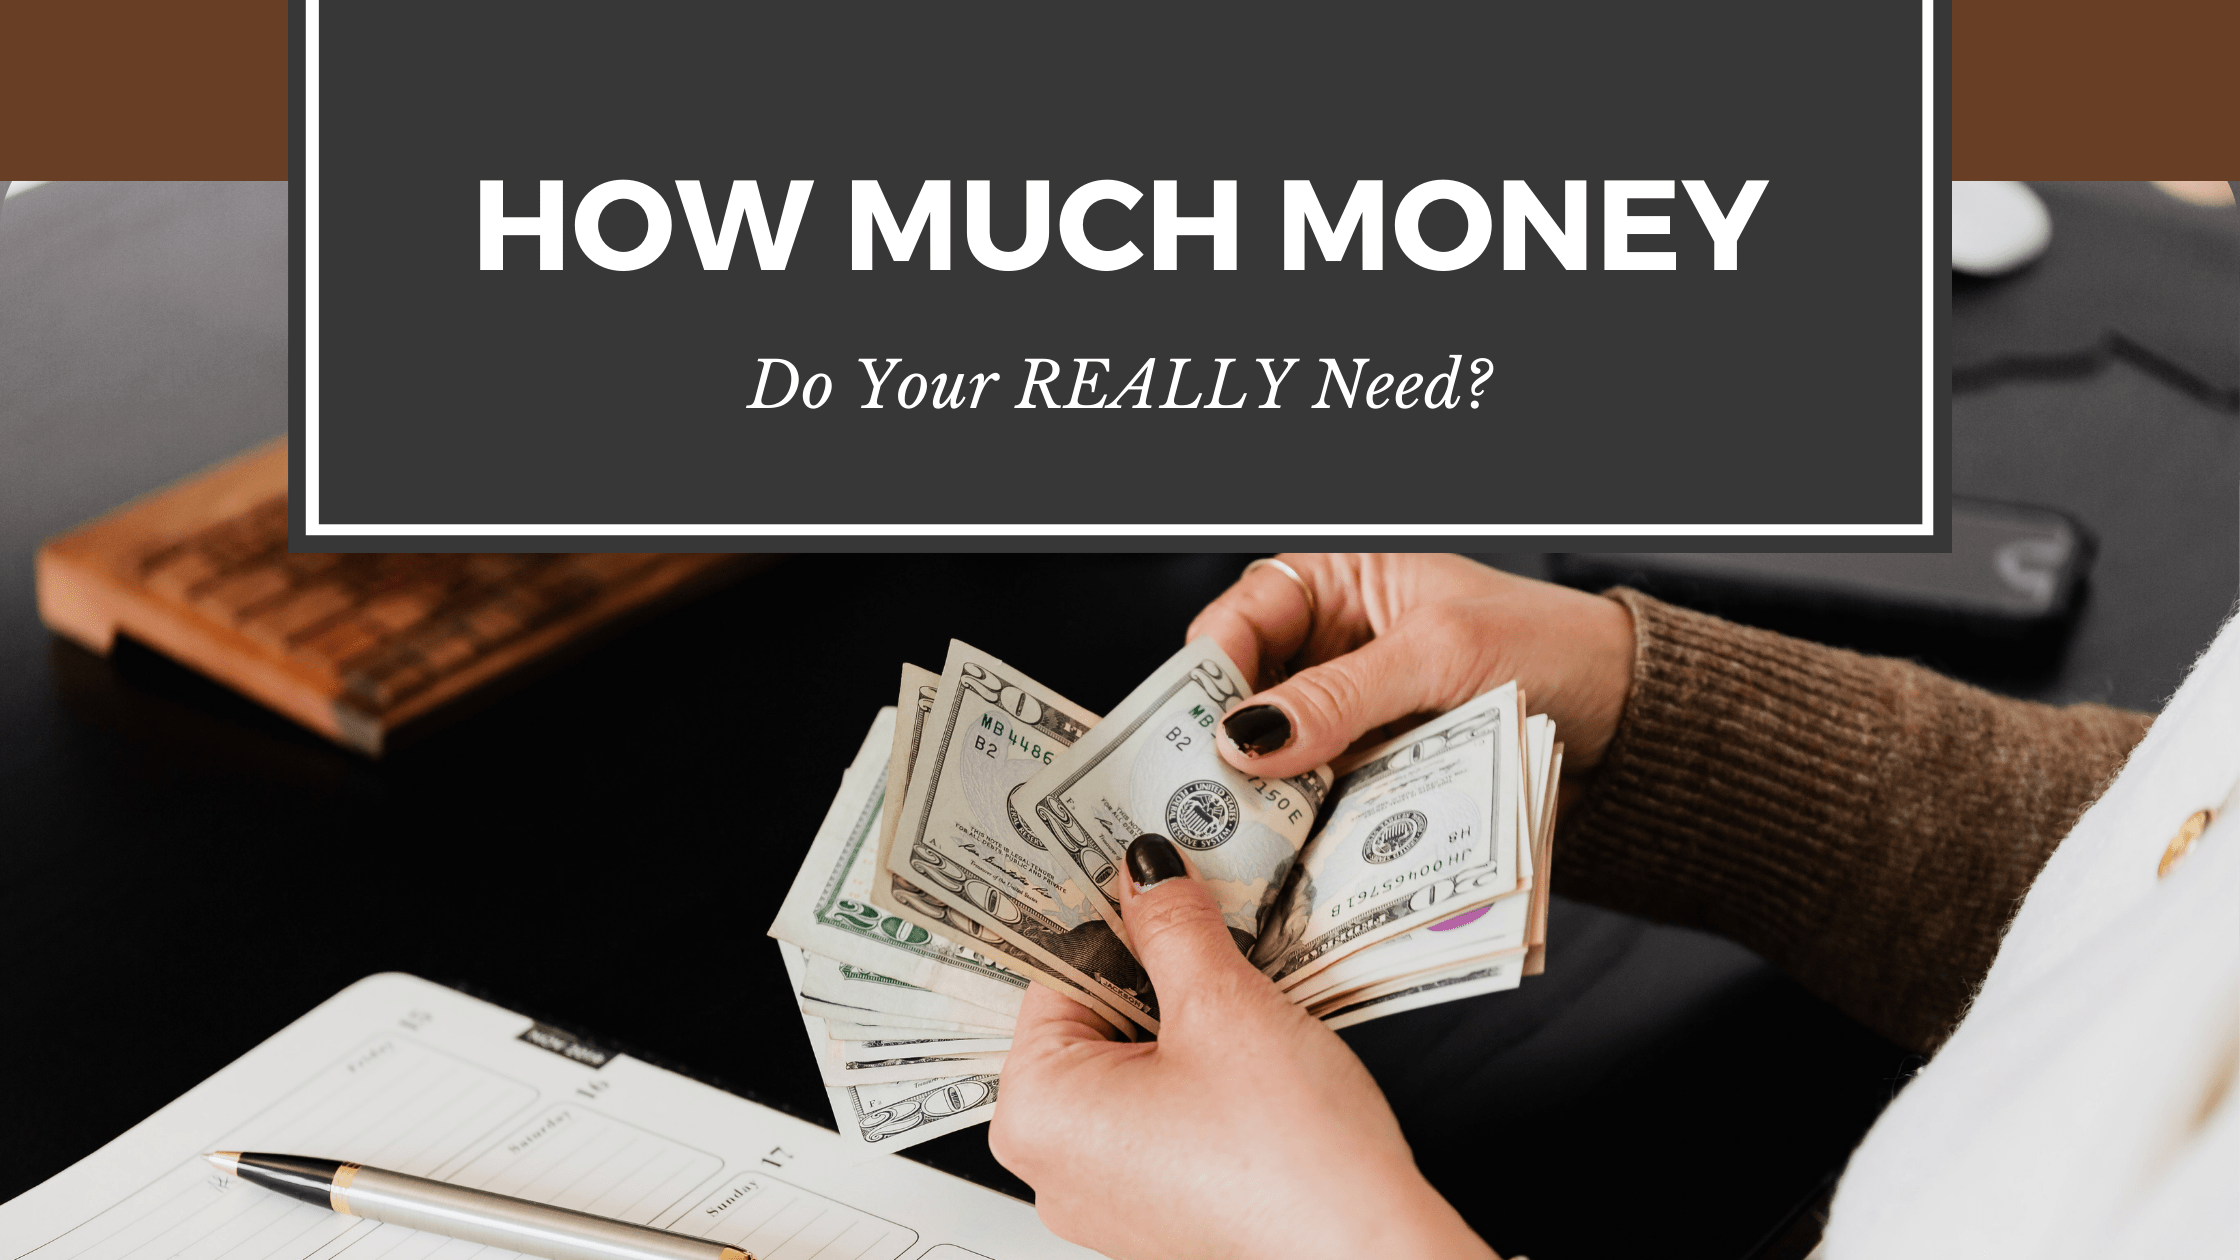 How Much Money Do You REALLY Need? - Partners in Fire